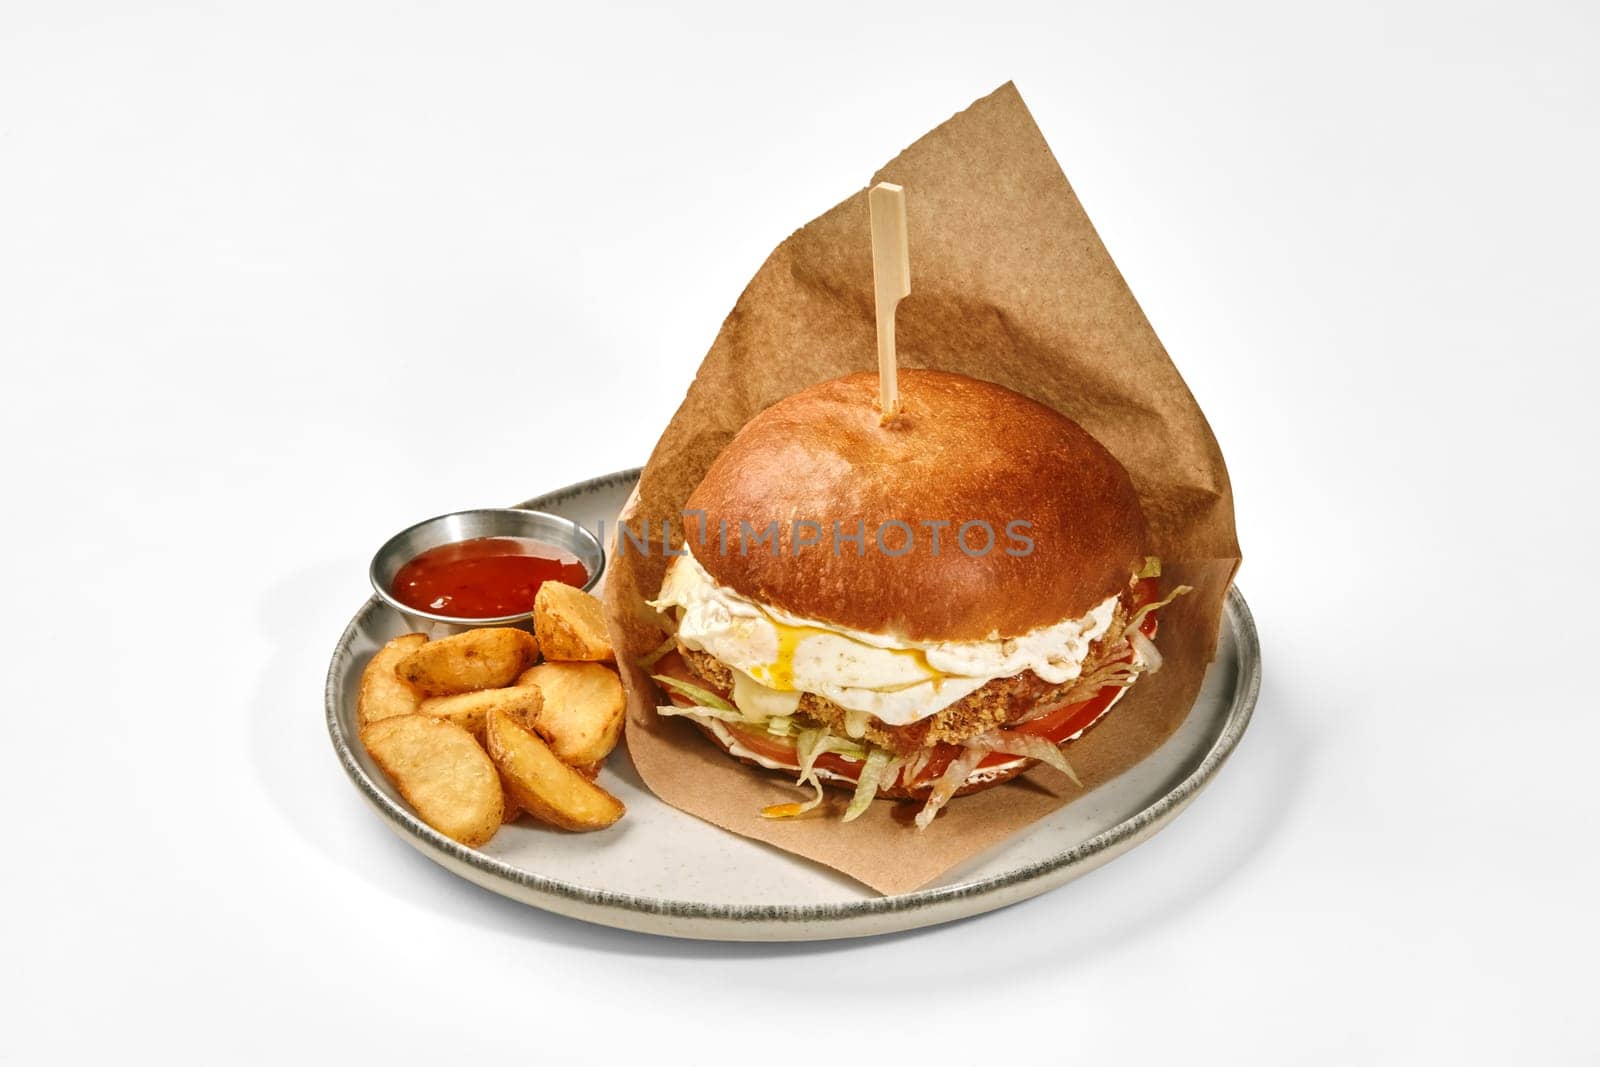 Hearty hamburger in browned bun with breaded beef patty, fried egg, tomato slices and lettuce in paper wrap served with side of baked country style potatoes and spicy sauce on ceramic plate